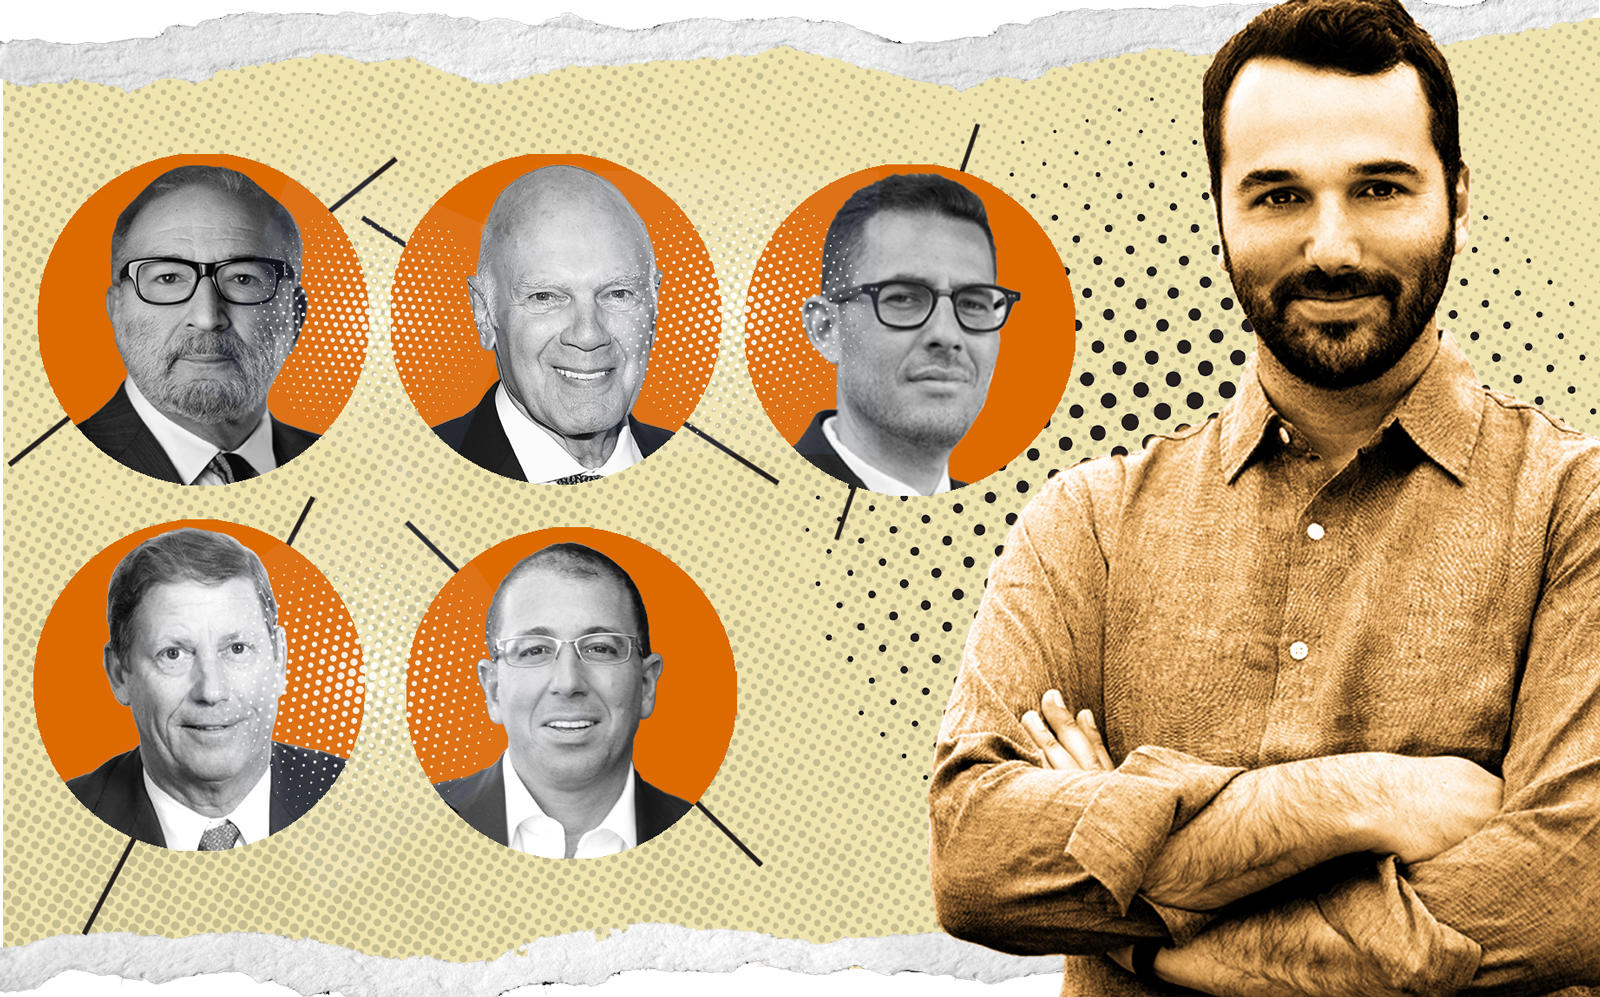 Industrious CEO Jamie Hodari (right). Inset (clockwise): TF Cornerstone’s Frederick Elghanayan, Vornado’s Steven Roth, LIVWRK’s Asher Abehsera, Thor Equities’ Joseph Sitt, and George Comfort & Sons’ Peter Duncan (Photo Illustration by Kevin Rebong for The Real Deal)